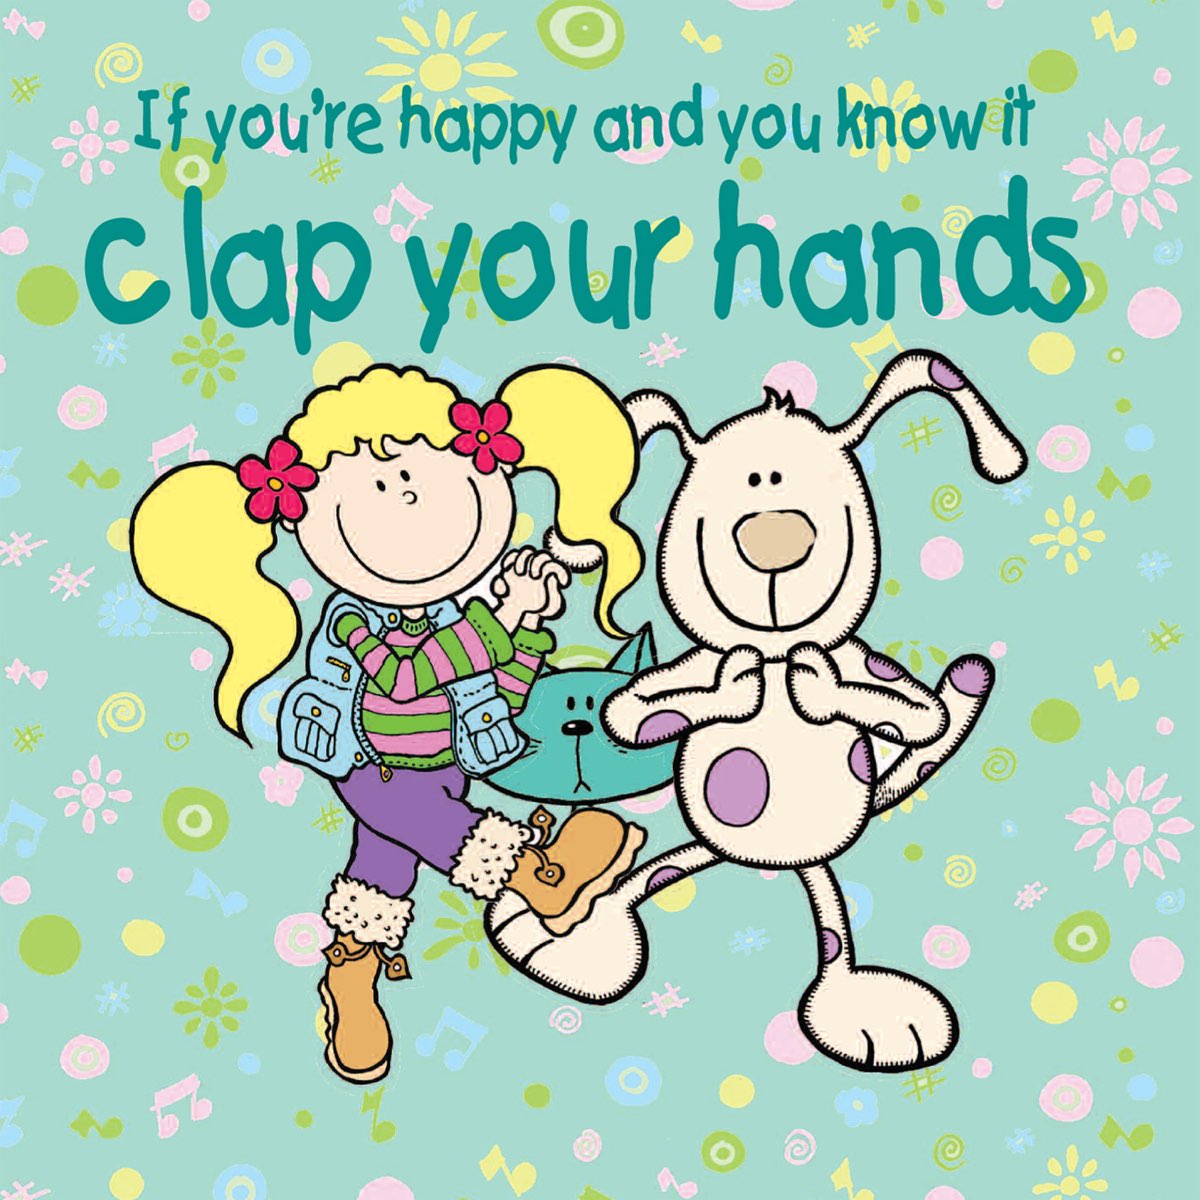 If you Happy Clap your hands. If you Happy and you know it Clap your hands. If you Happy Happy Happy Clap your hands real Life. If you Happy Clap your hands Worksheets. Together like you and me